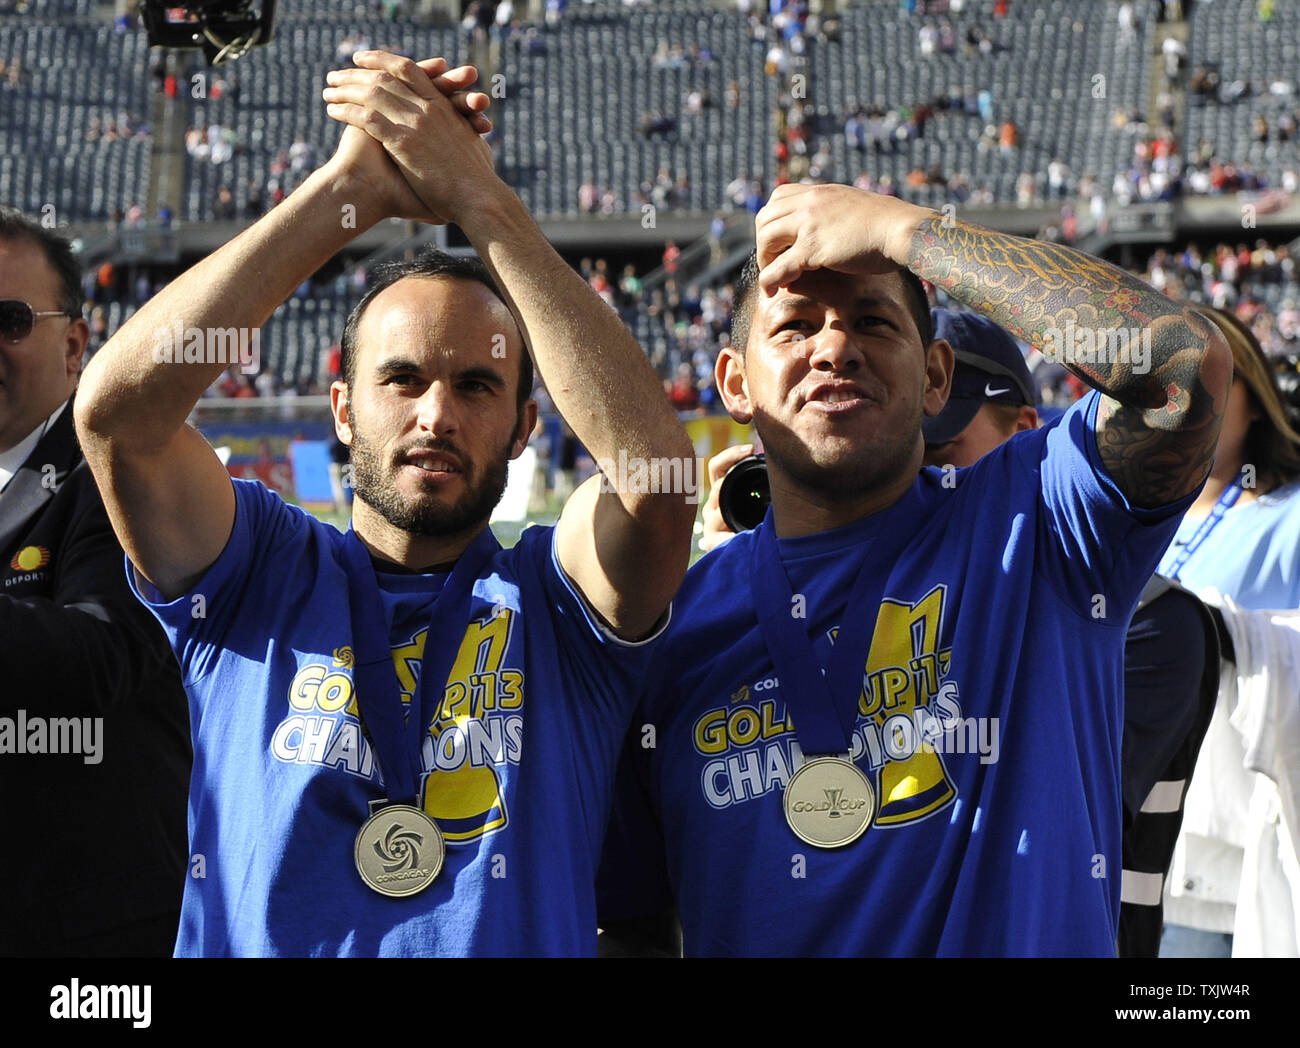 United States' Landon Donovan (L) and Nick Rimando celebrate after defeating Panama in the 2013 CONCACAF Gold Cup Final at Soldier Field in Chicago on July 28, 2013. The United States won 1-0.     UPI/Brian Kersey Stock Photo